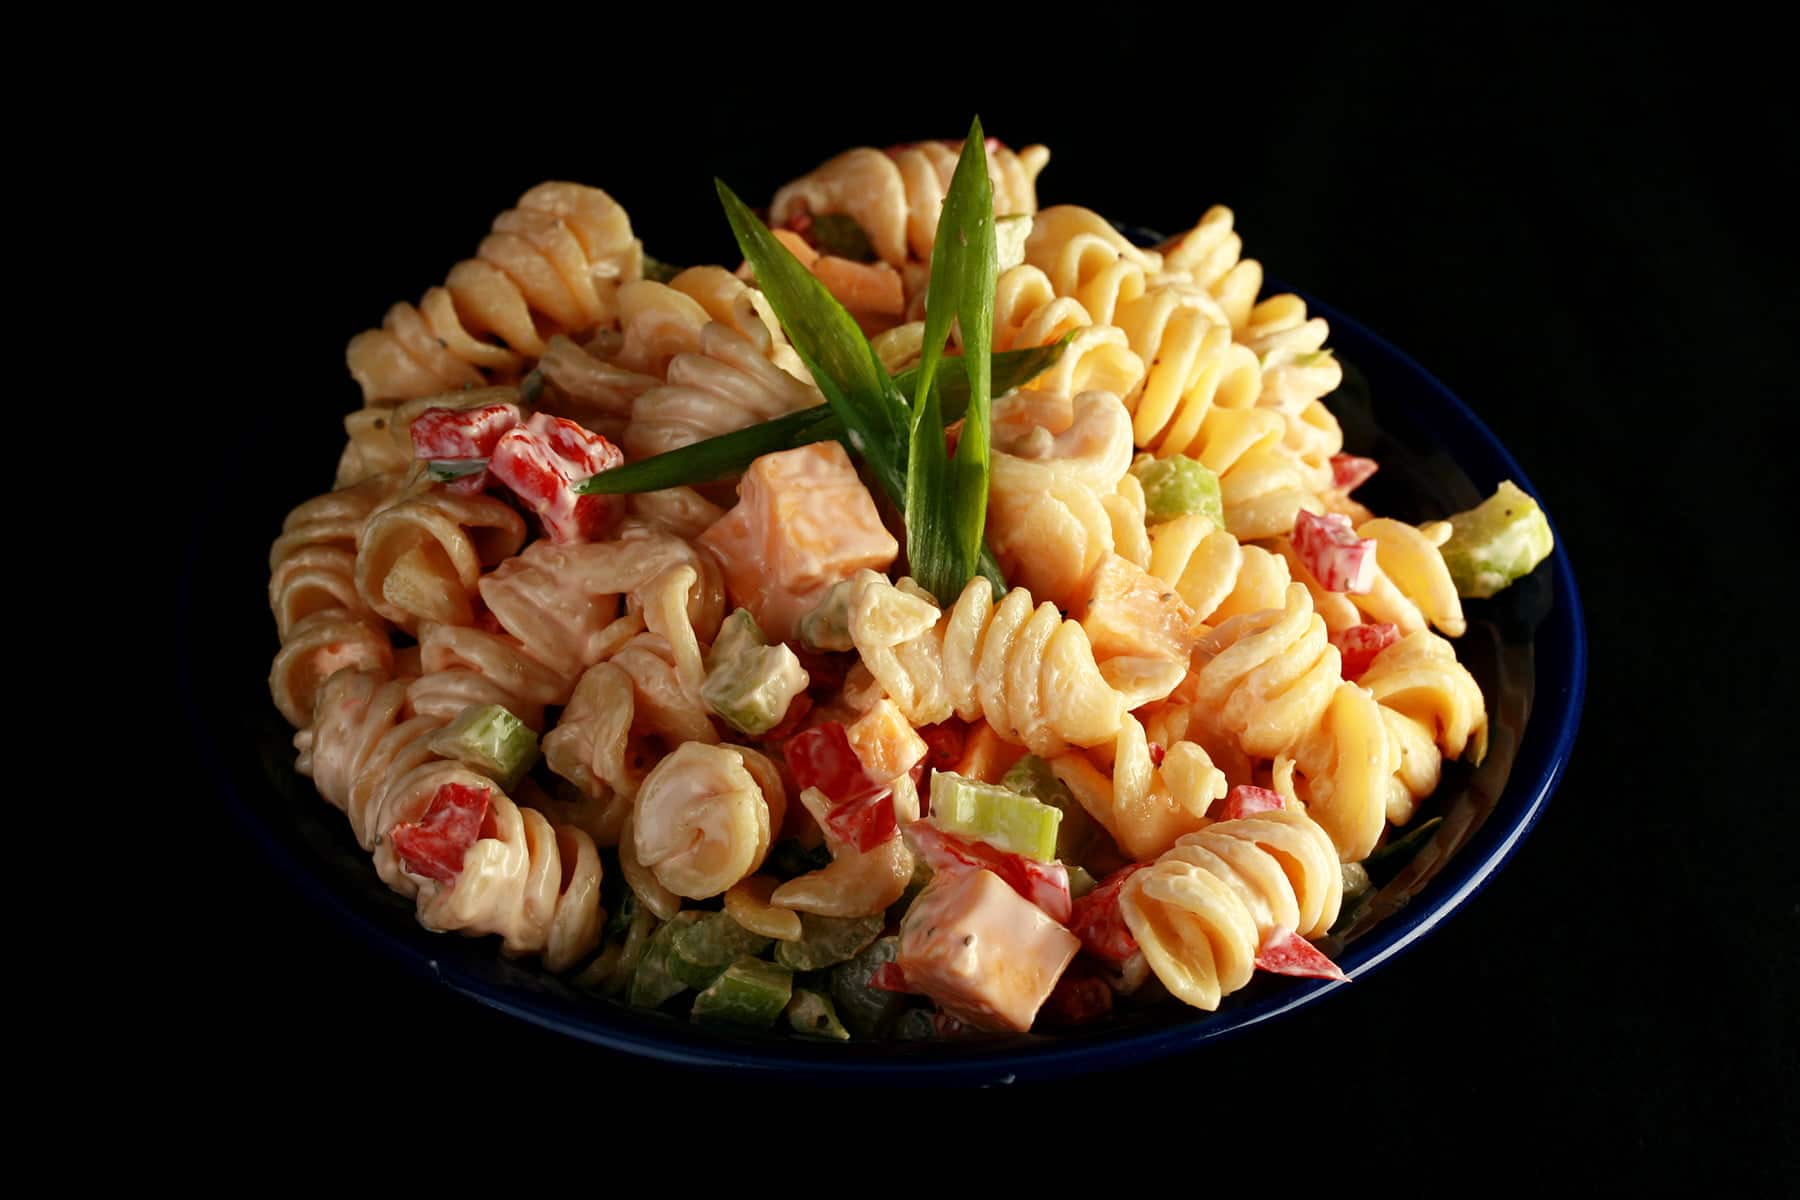 A blue bowl overflowing with a rotini based pasta salad. Cubes of cheese, red peppers, celery slices, and green onion are all visible.